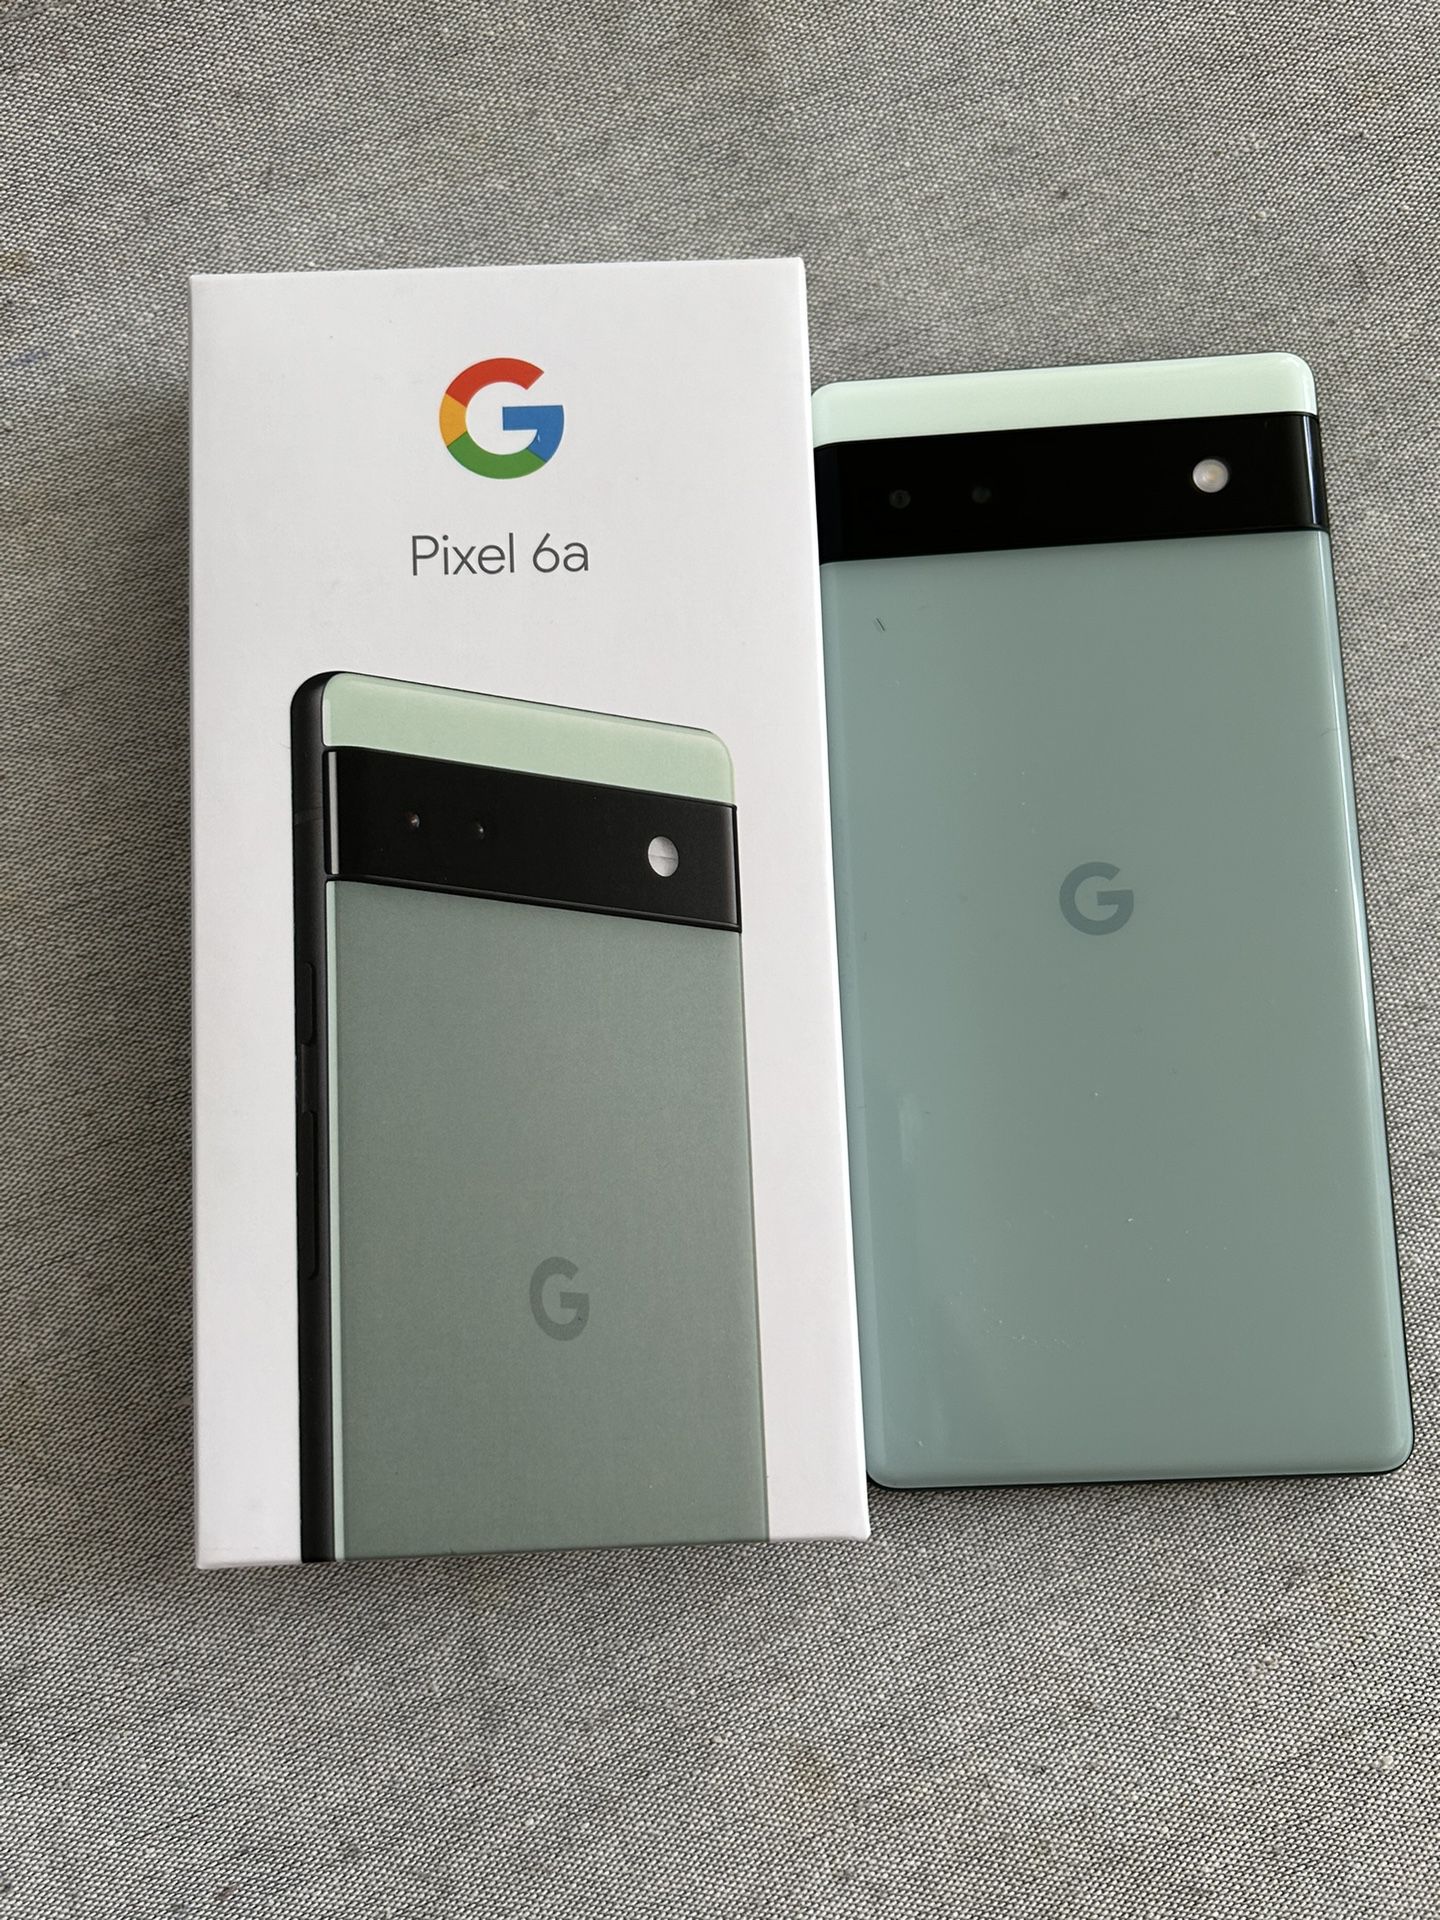 Google Pixel 6a — 5G Sub-6, Sage, 128 GB , Unlocked- for Sale in